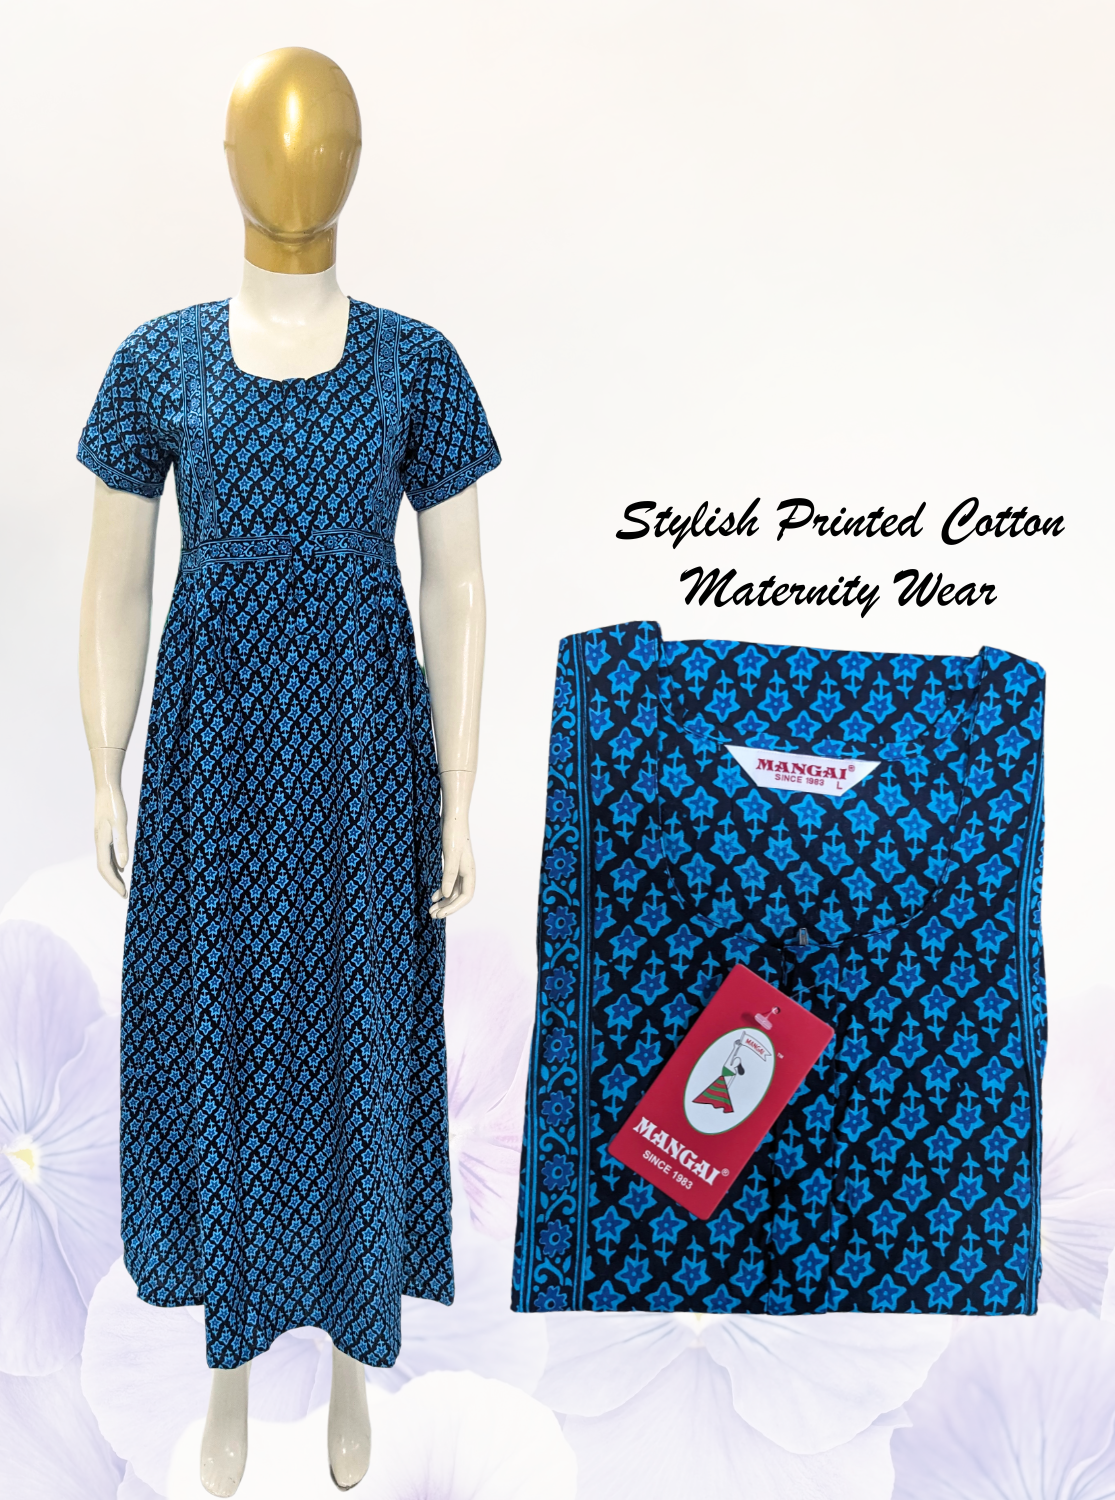 New MANGAI Cotton Printed Maternity Wear for Pregnancy Women's | Soft Cotton | Above Knee Length Covered | Front Open Zipper| Beautiful Printed Maternity Wear